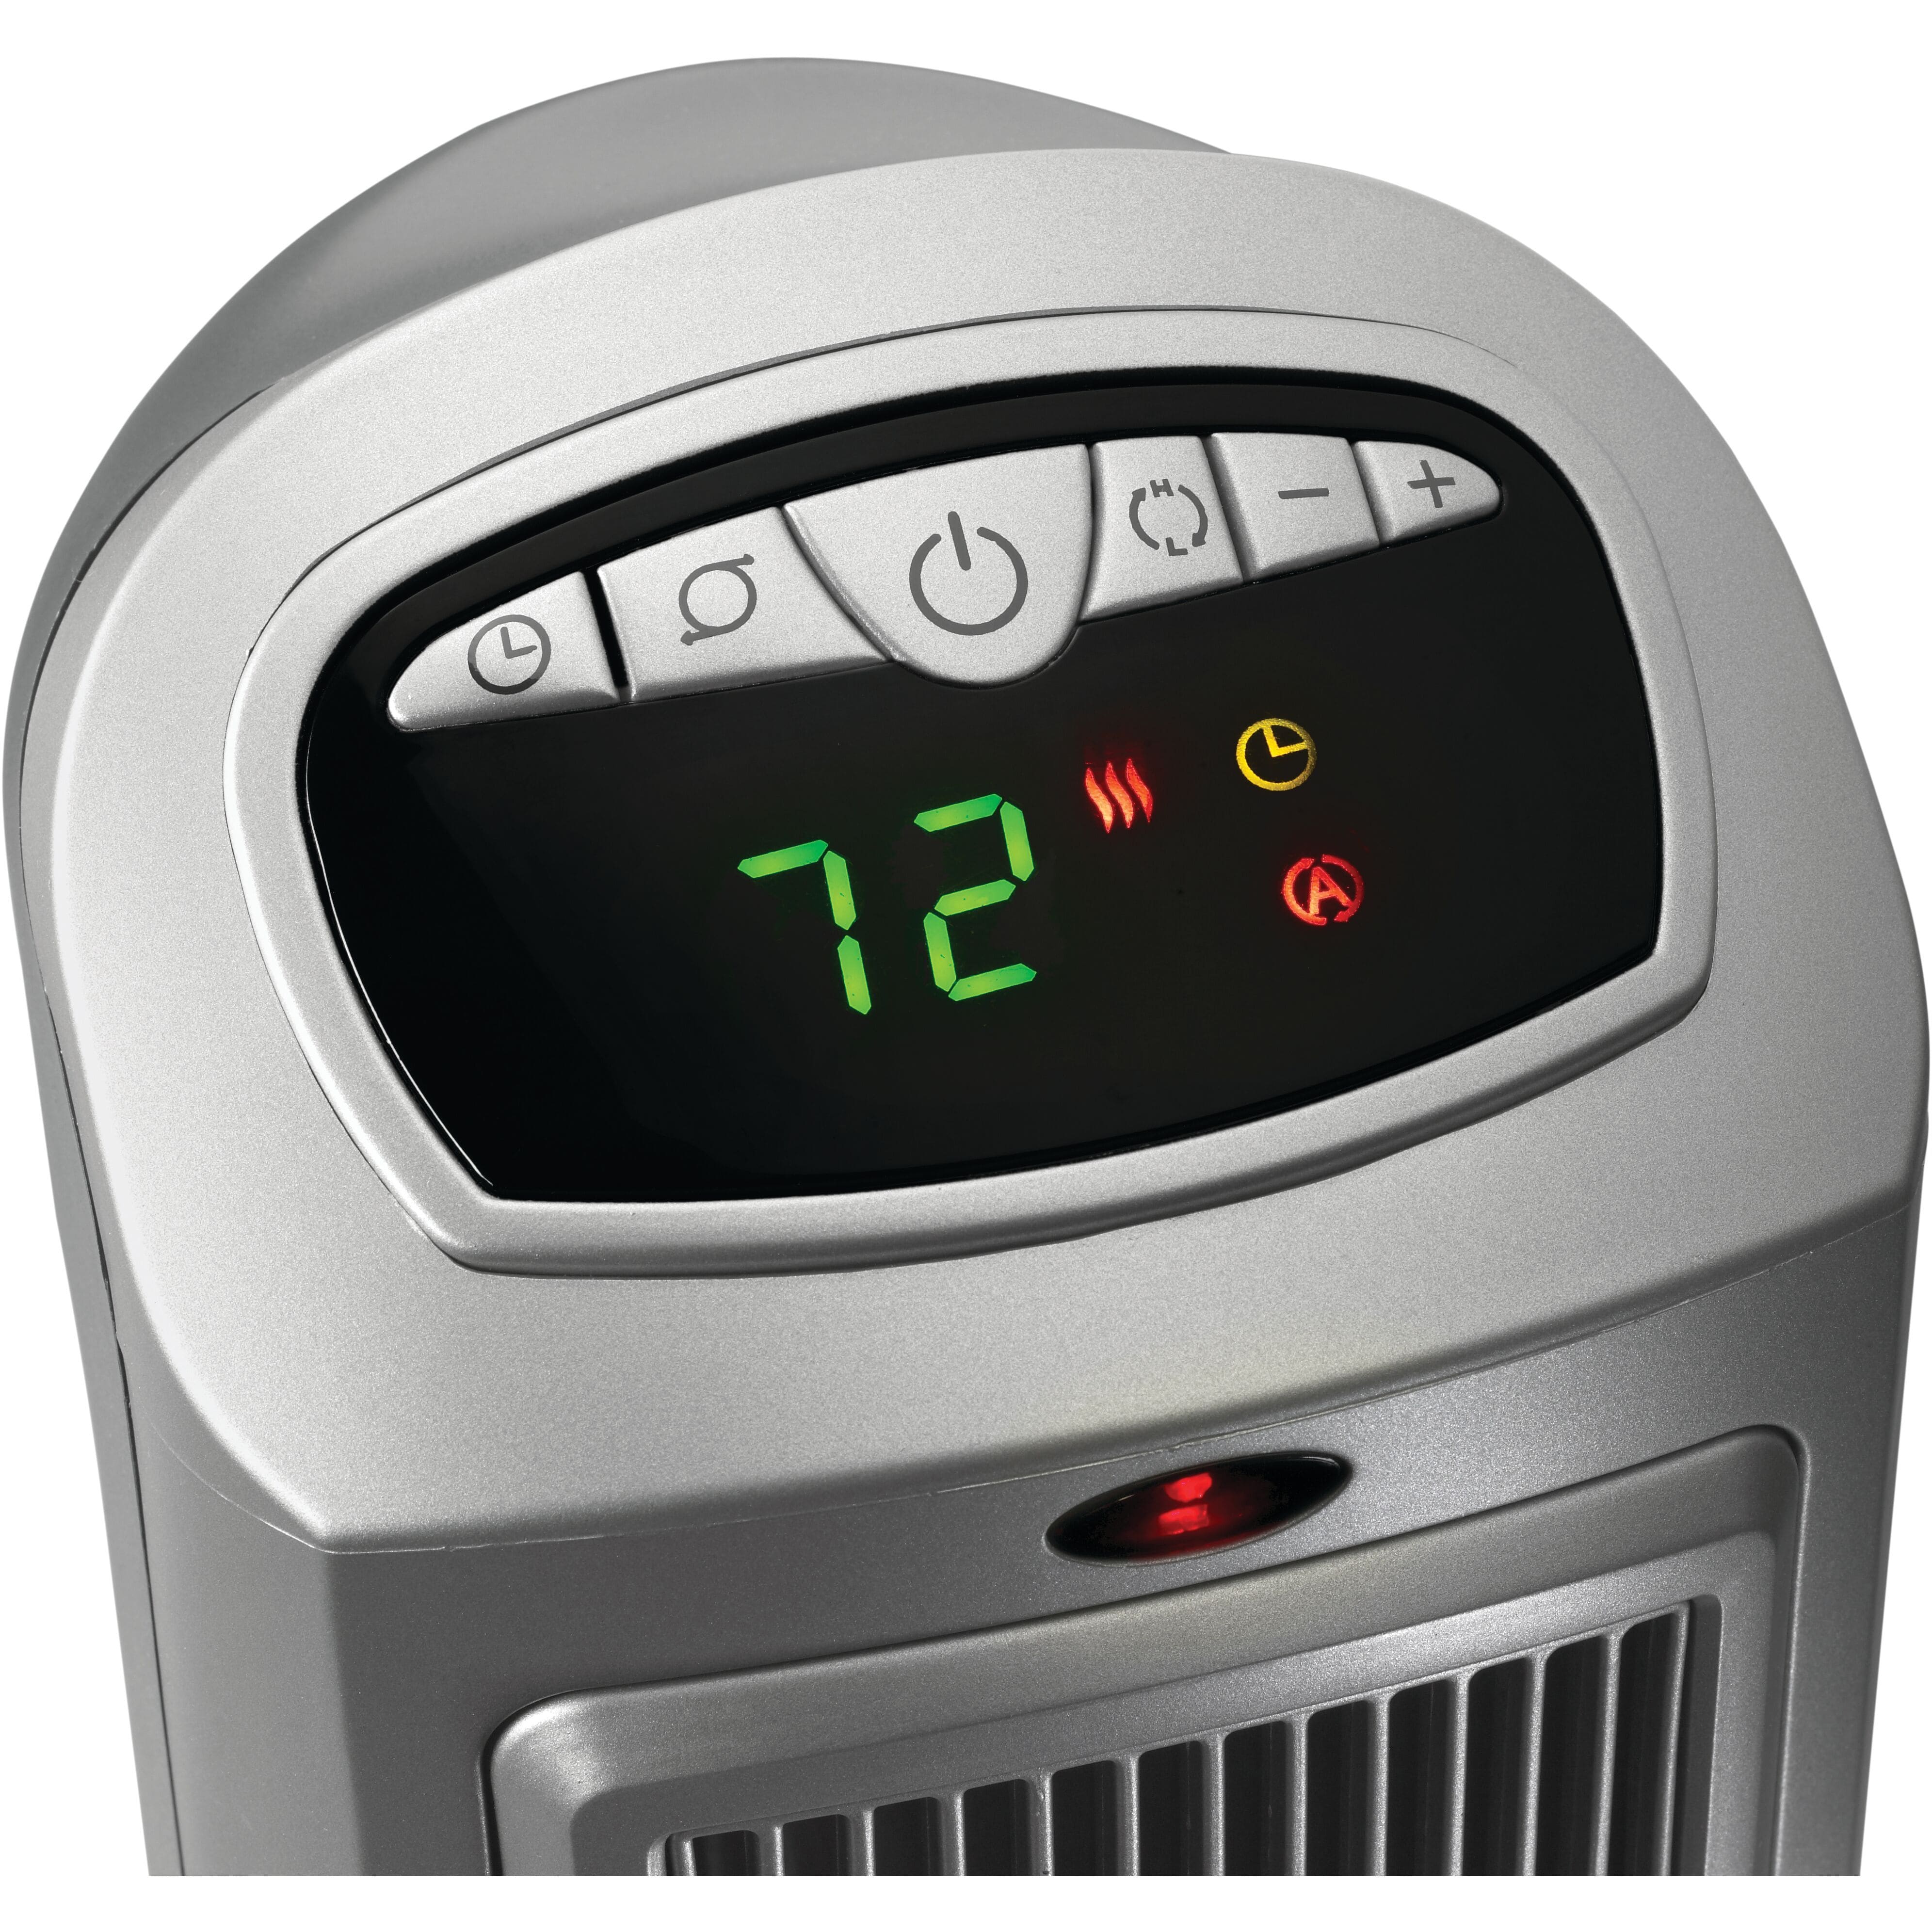 Lasko Ceramic Tower Heater with Digital Display and Remote Control